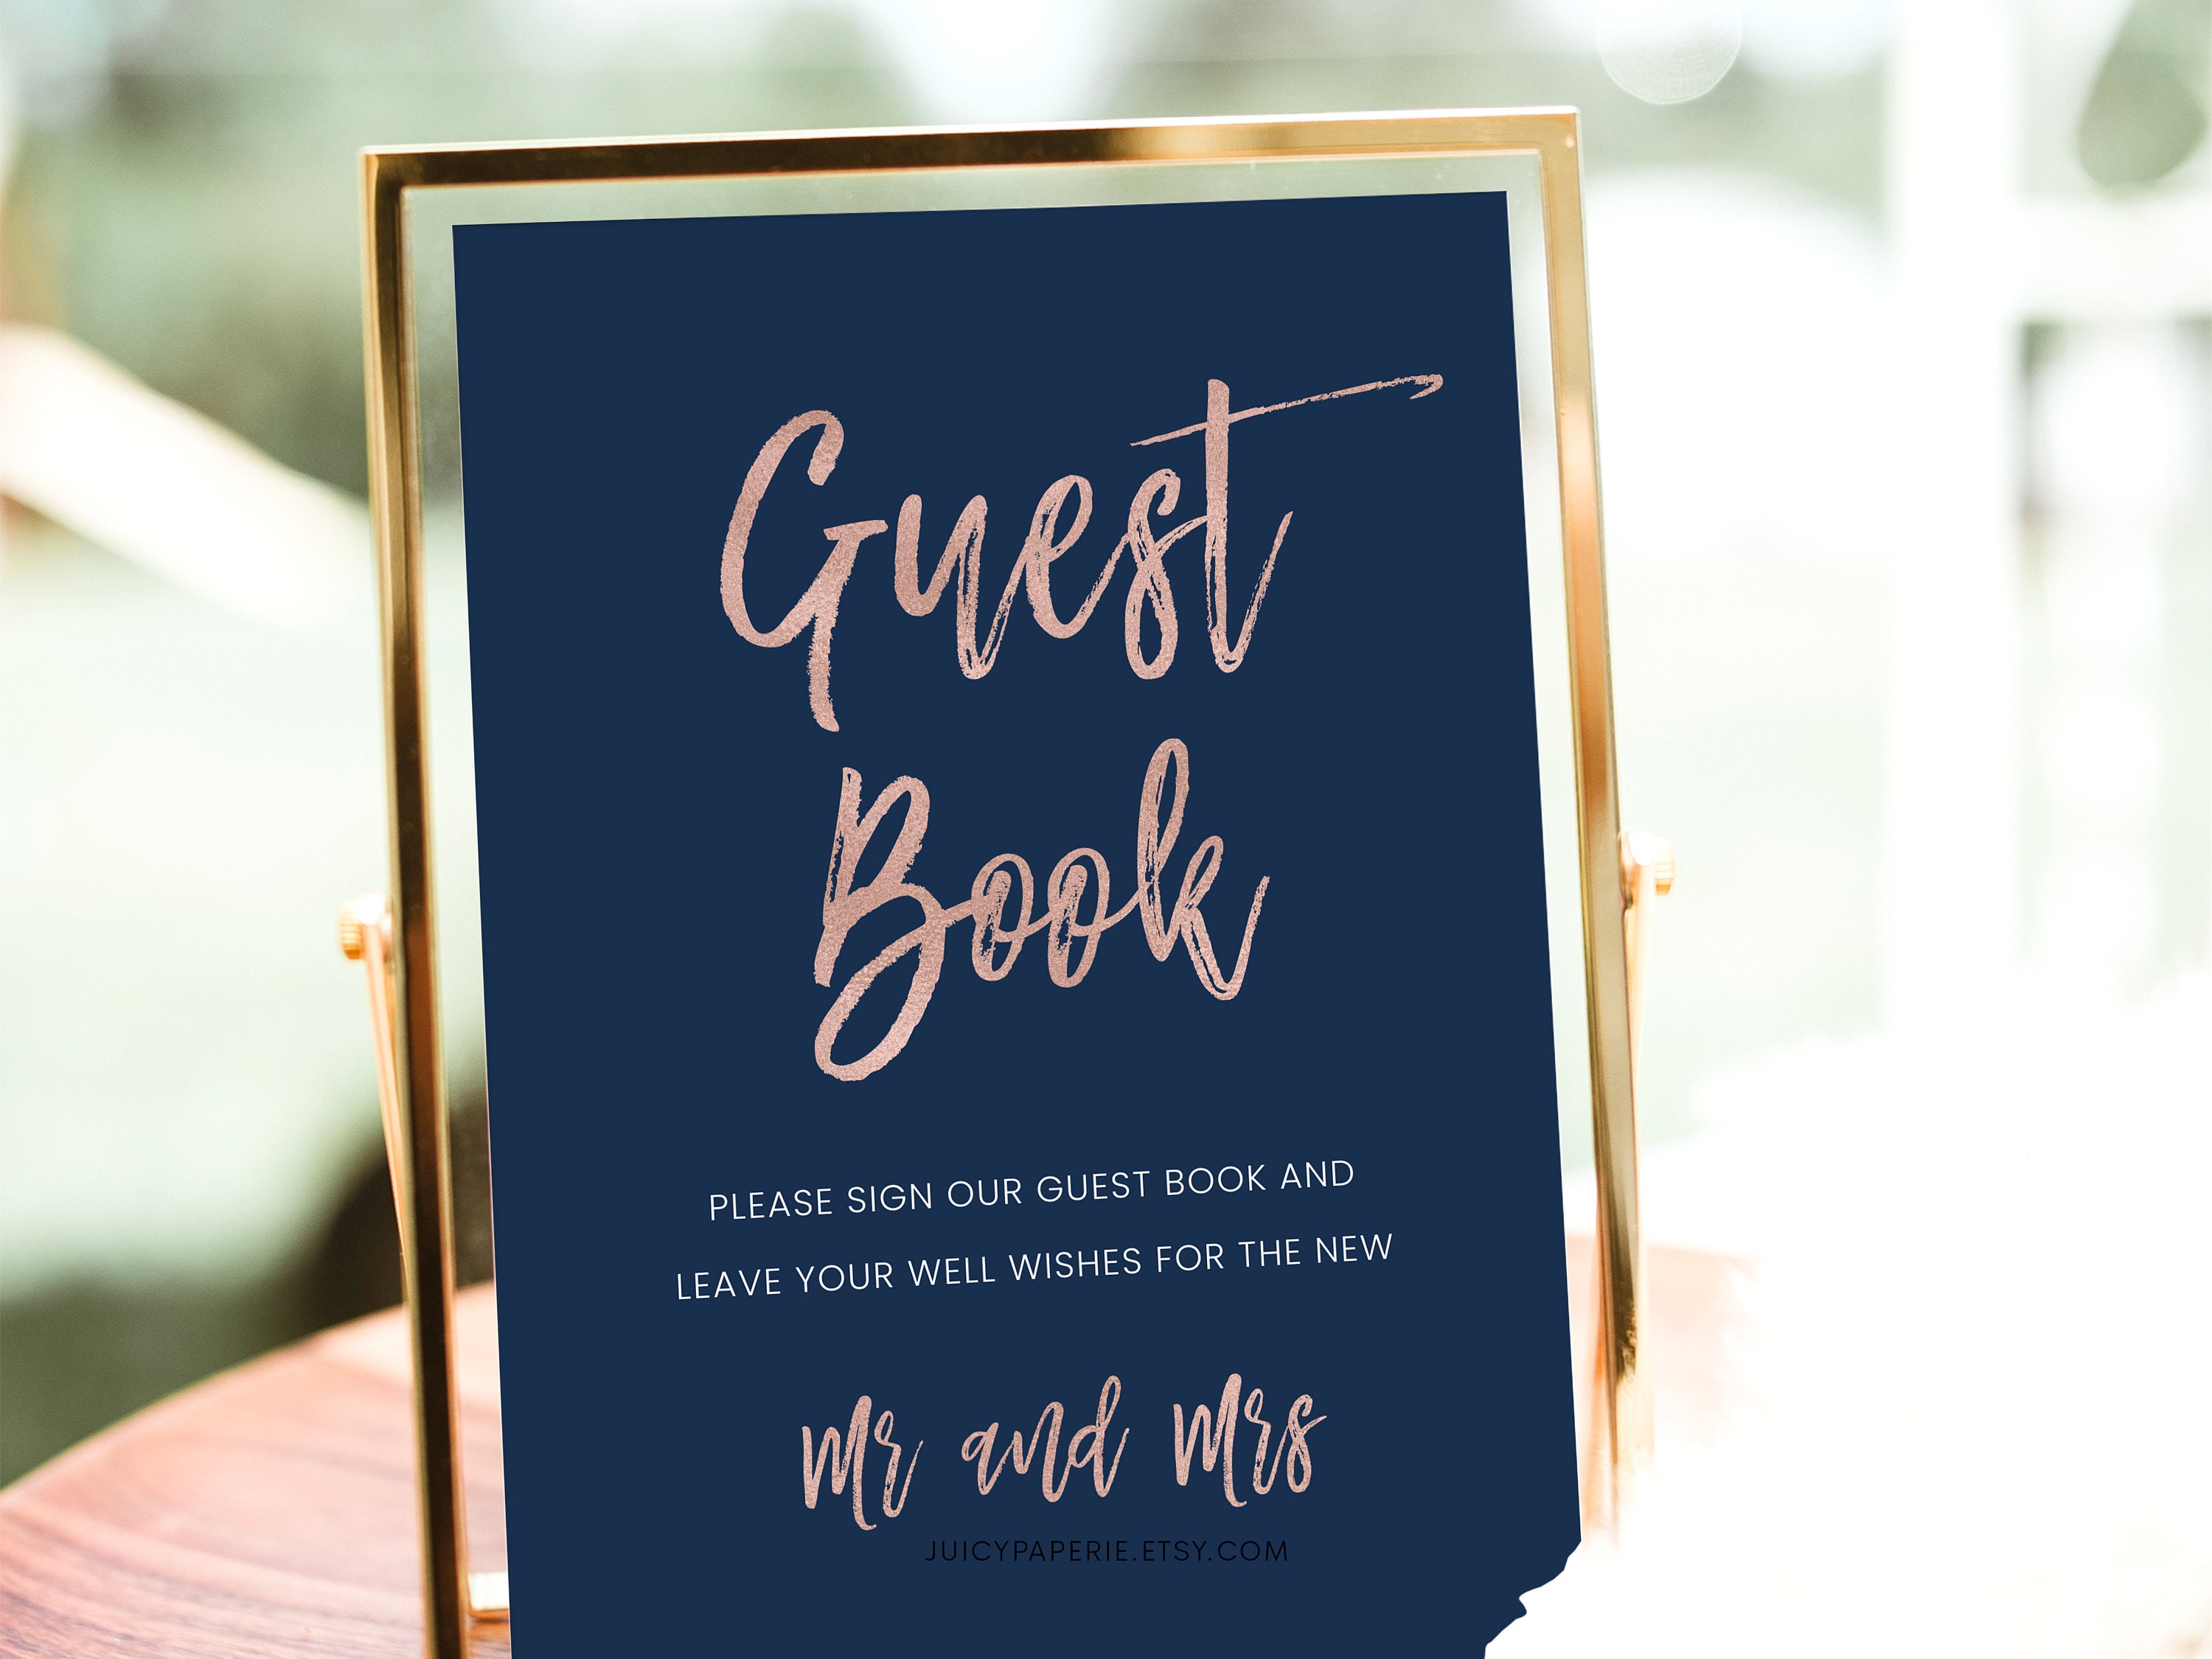 Rose Gold Wedding Guest Book Sign W730 Navy Wedding Guest Book Sign Please Sign Our Guest Book Sign Navy Guest Book Sign